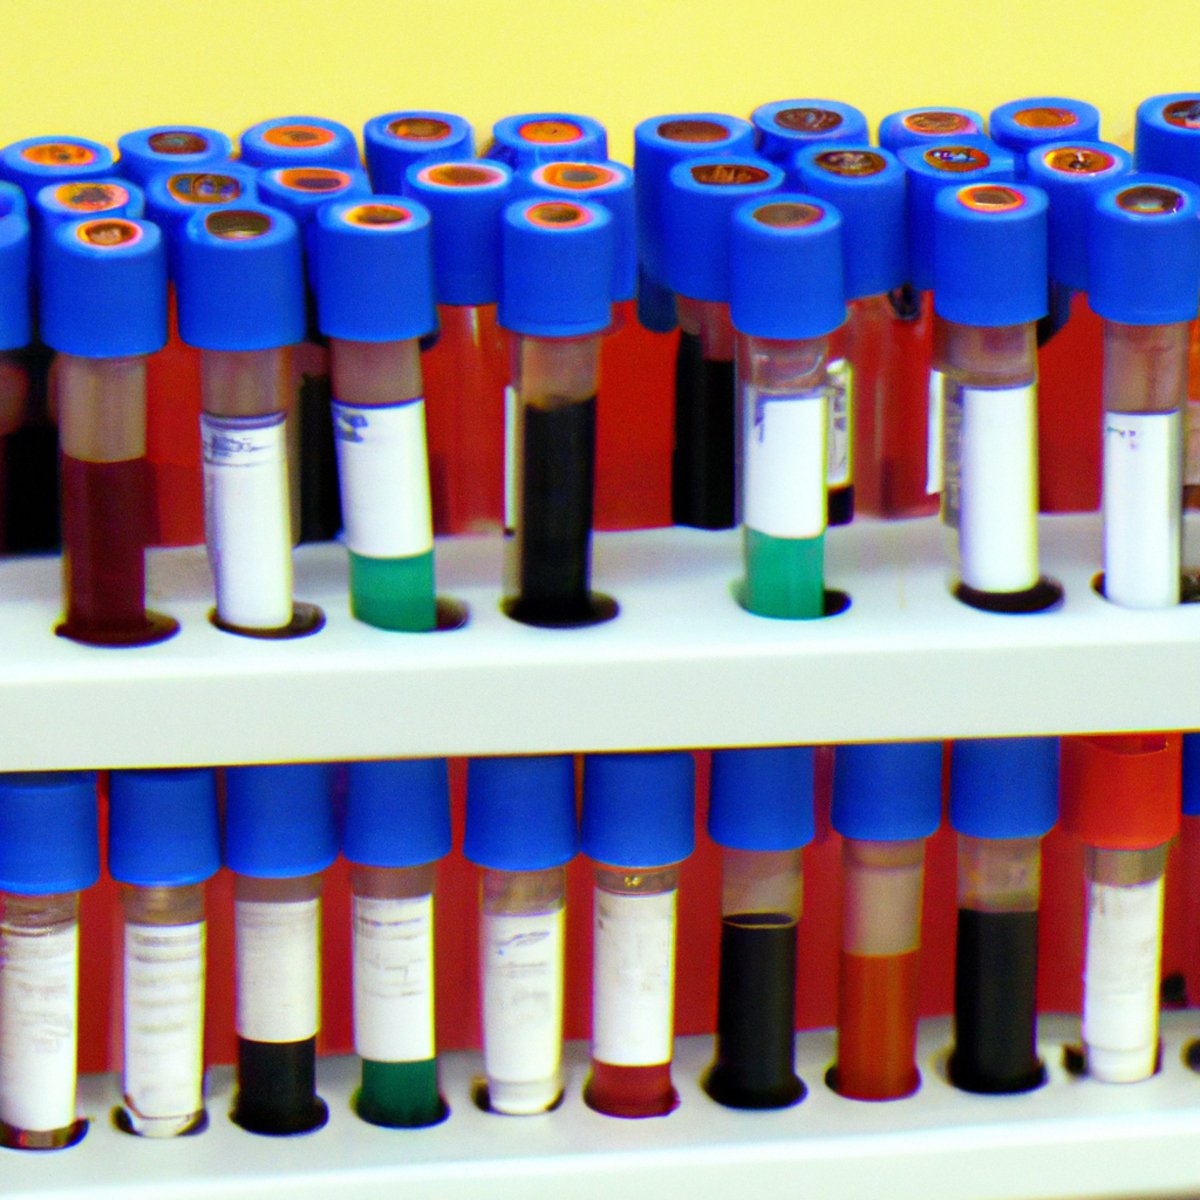 Lab test tubes with blood samples labeled with strategies for boosting platelet counts in managing ITP (Idiopathic Thrombocytopenic Purpura).